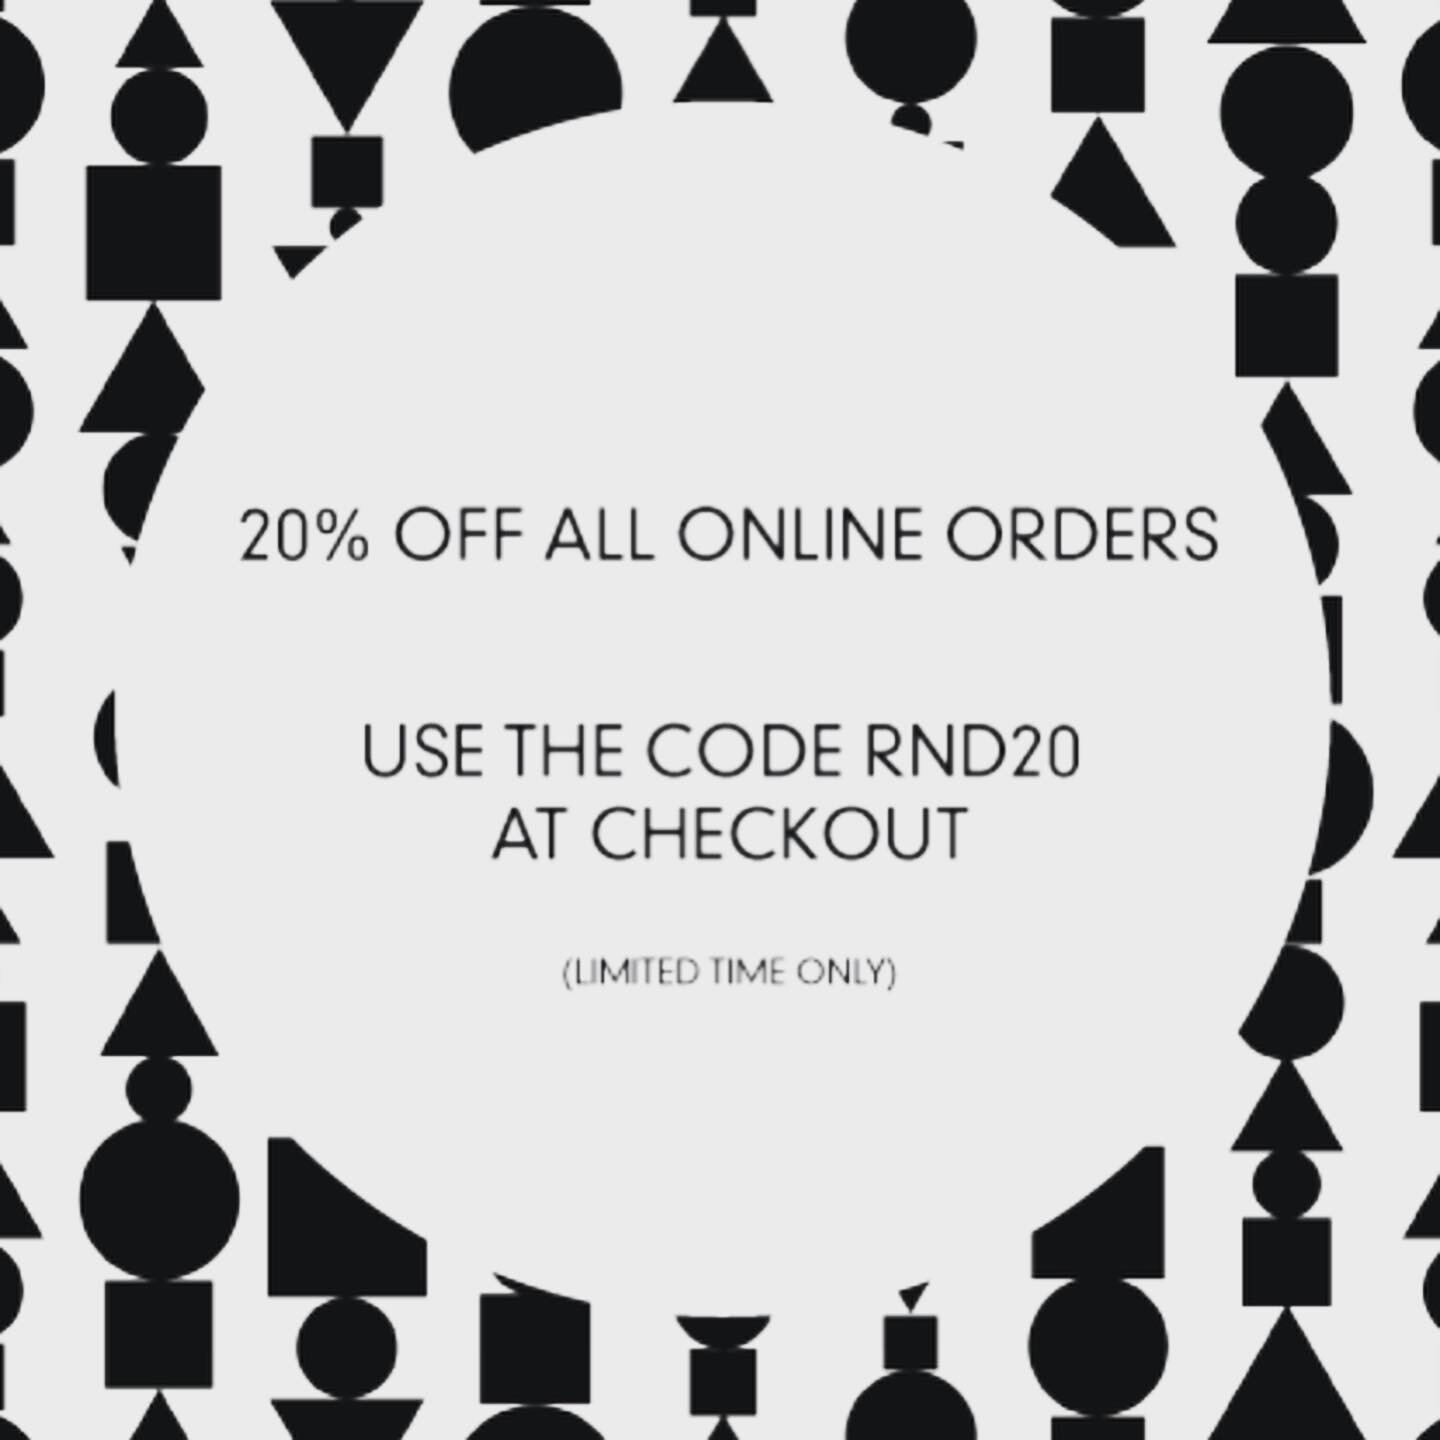 Head over to the shop for 20% off (limited time only &amp; limited stock) but thought you could all do with a Monday morning treat!! Enjoy! Use code RND20 at checkout 😘

www.rebeccanewmandesign.com
#sale #prints #surfacepatterns #linen #home #smallb